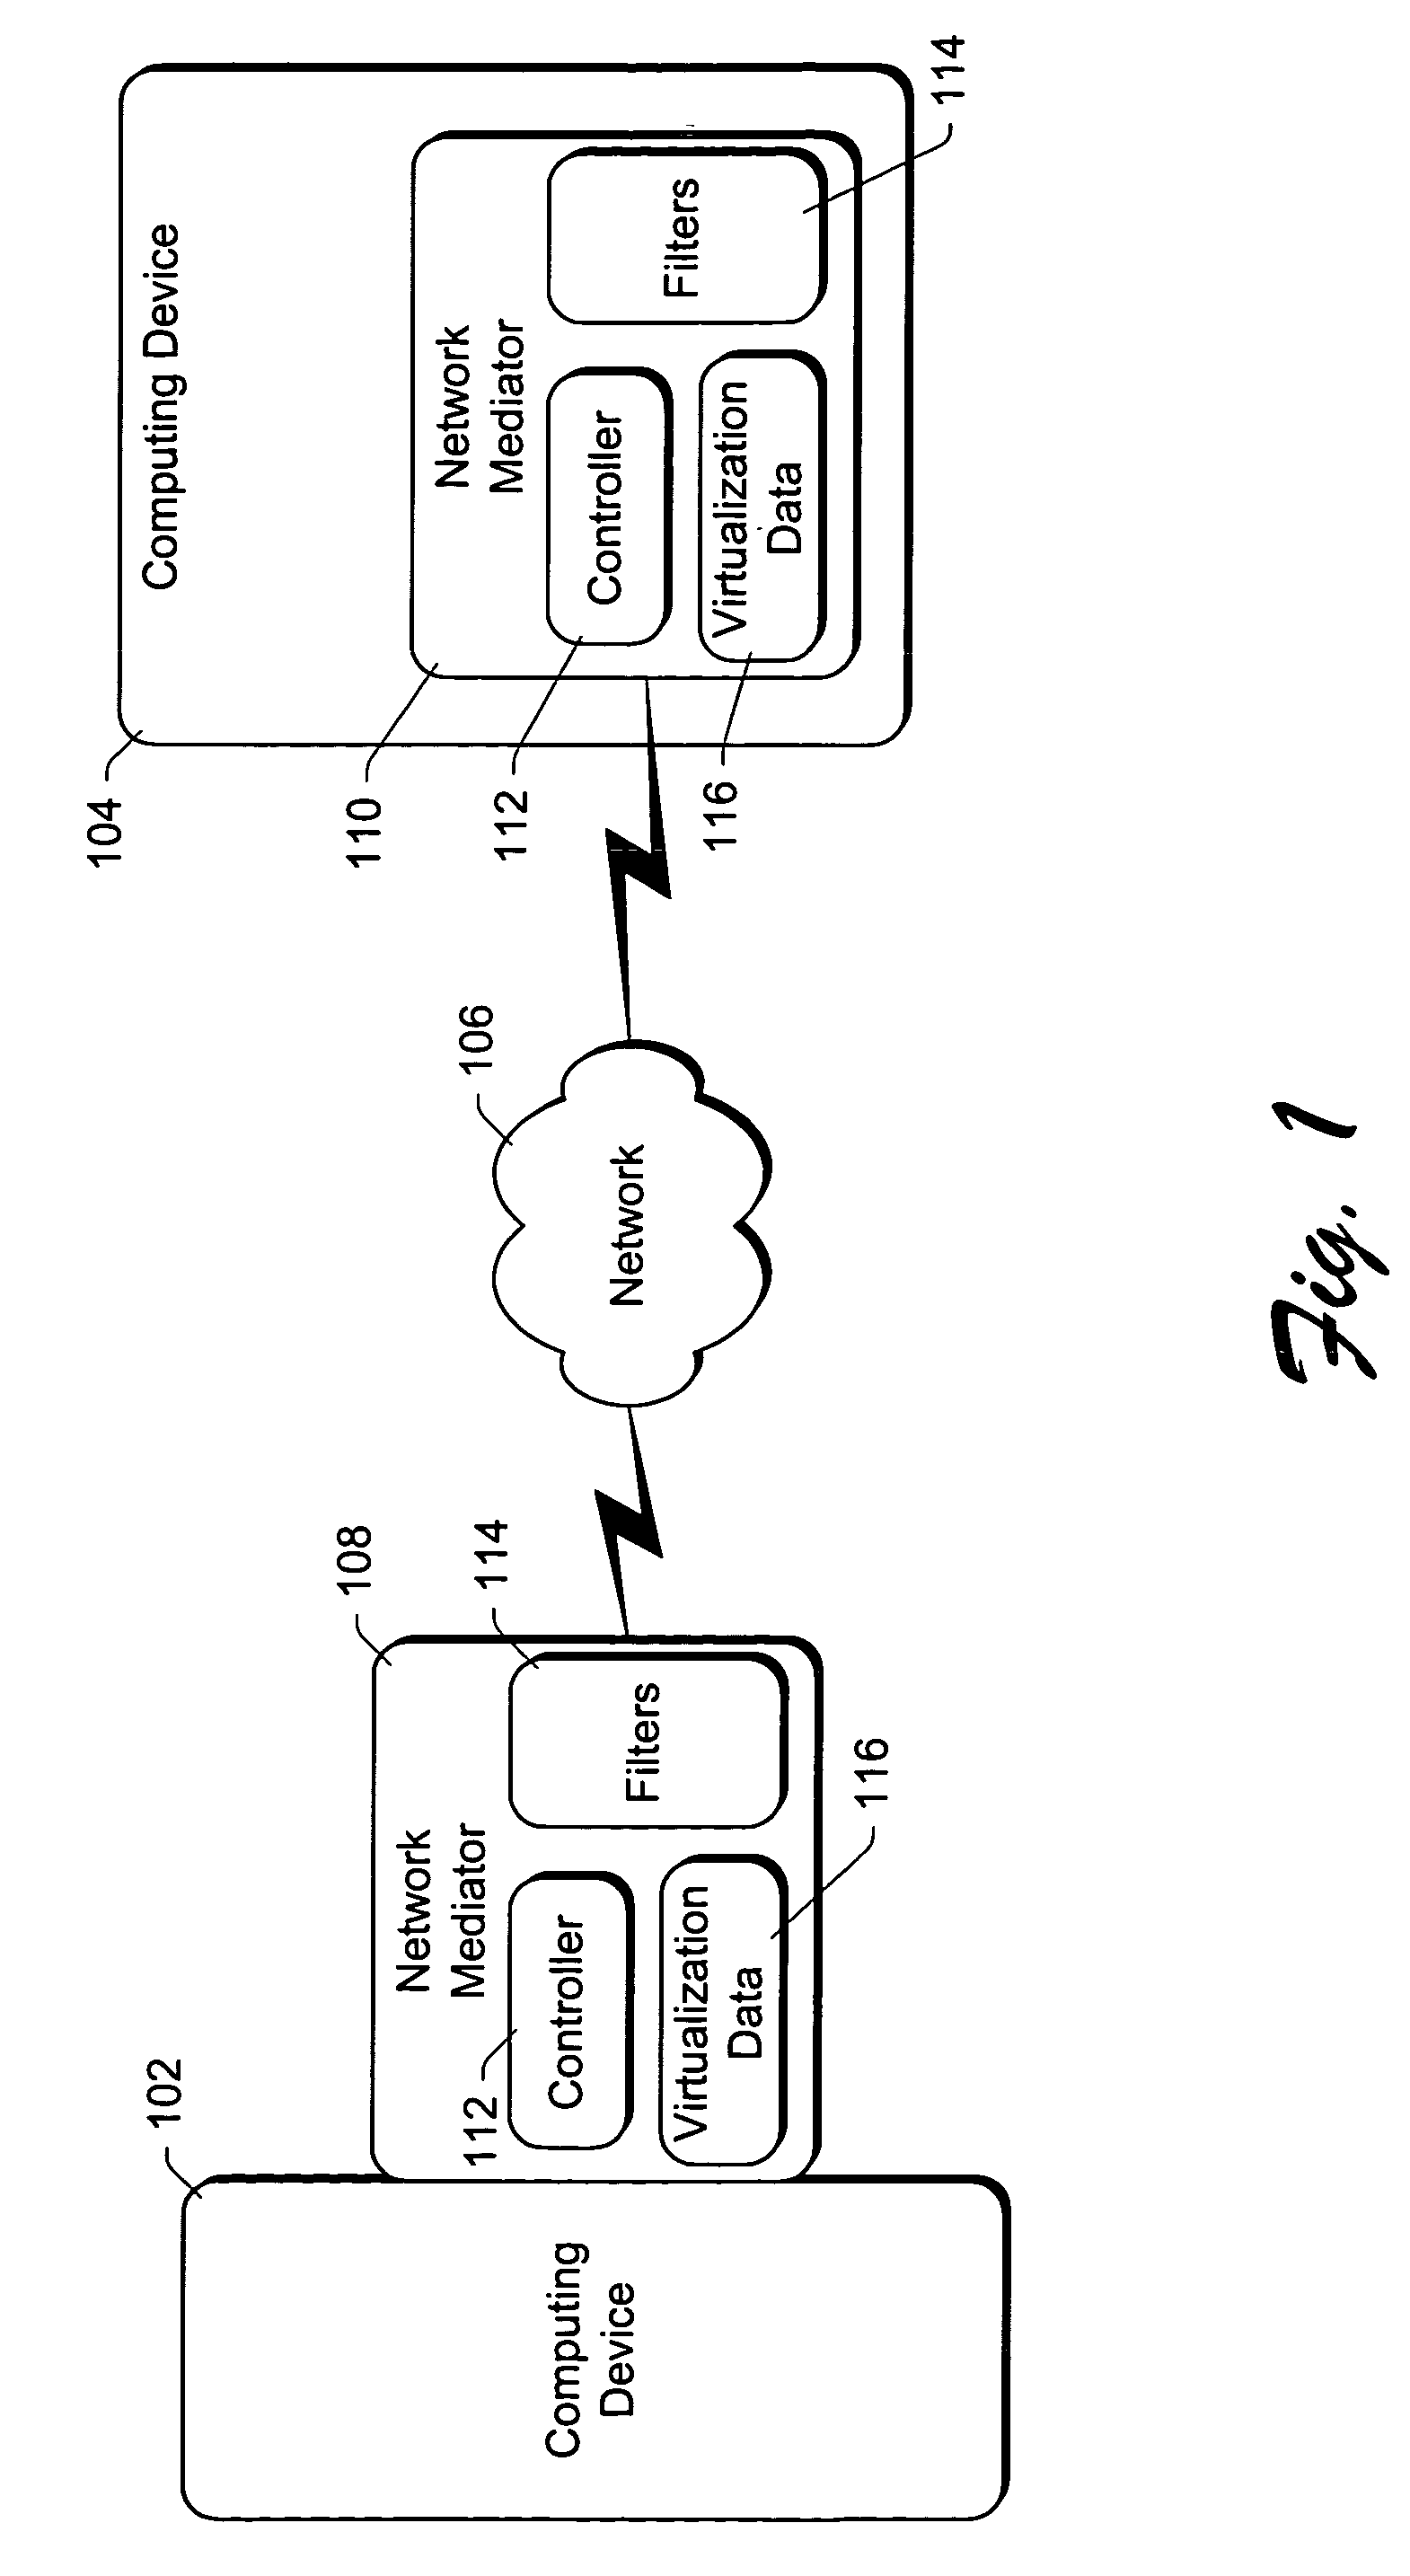 Using packet filters and network virtualization to restrict network communications